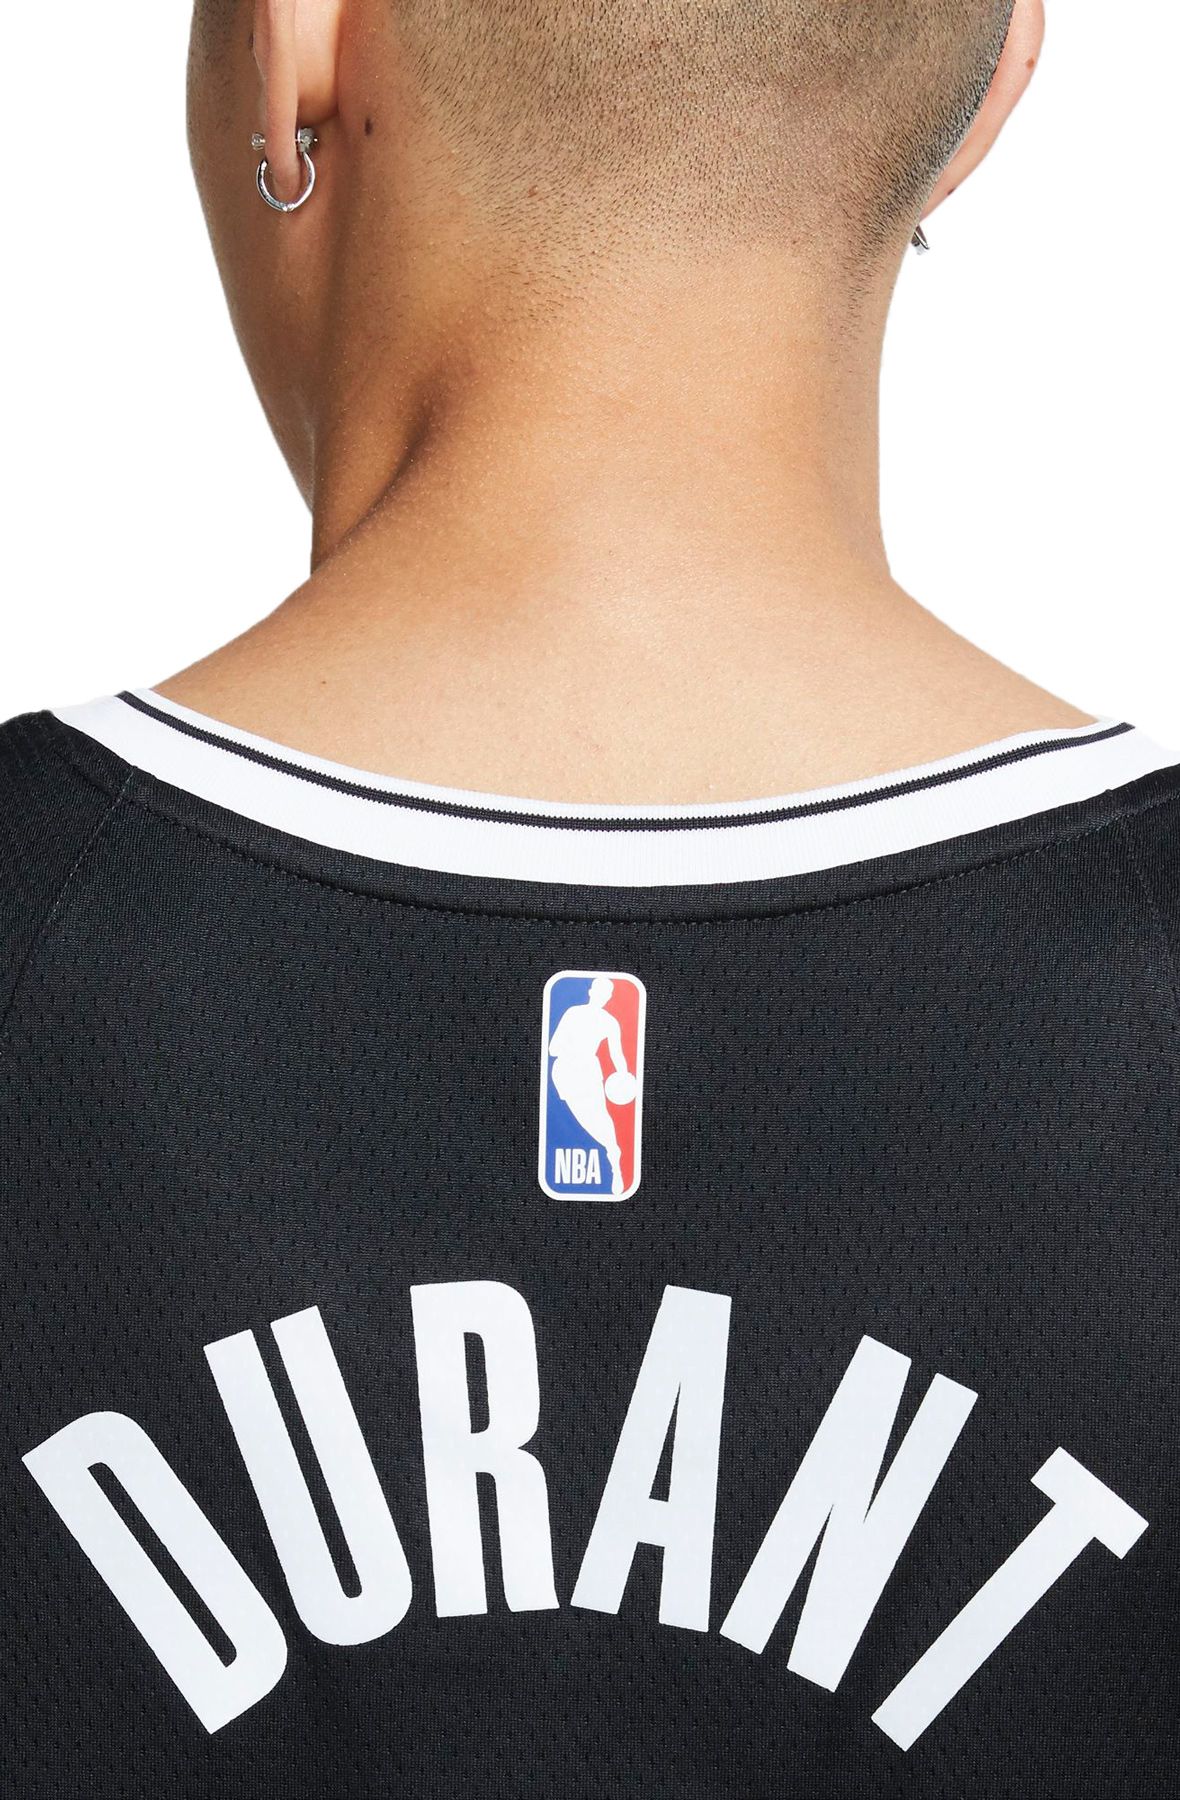 Kevin Durant Nets Icon Edition 2020 Nike NBA Authentic Jersey